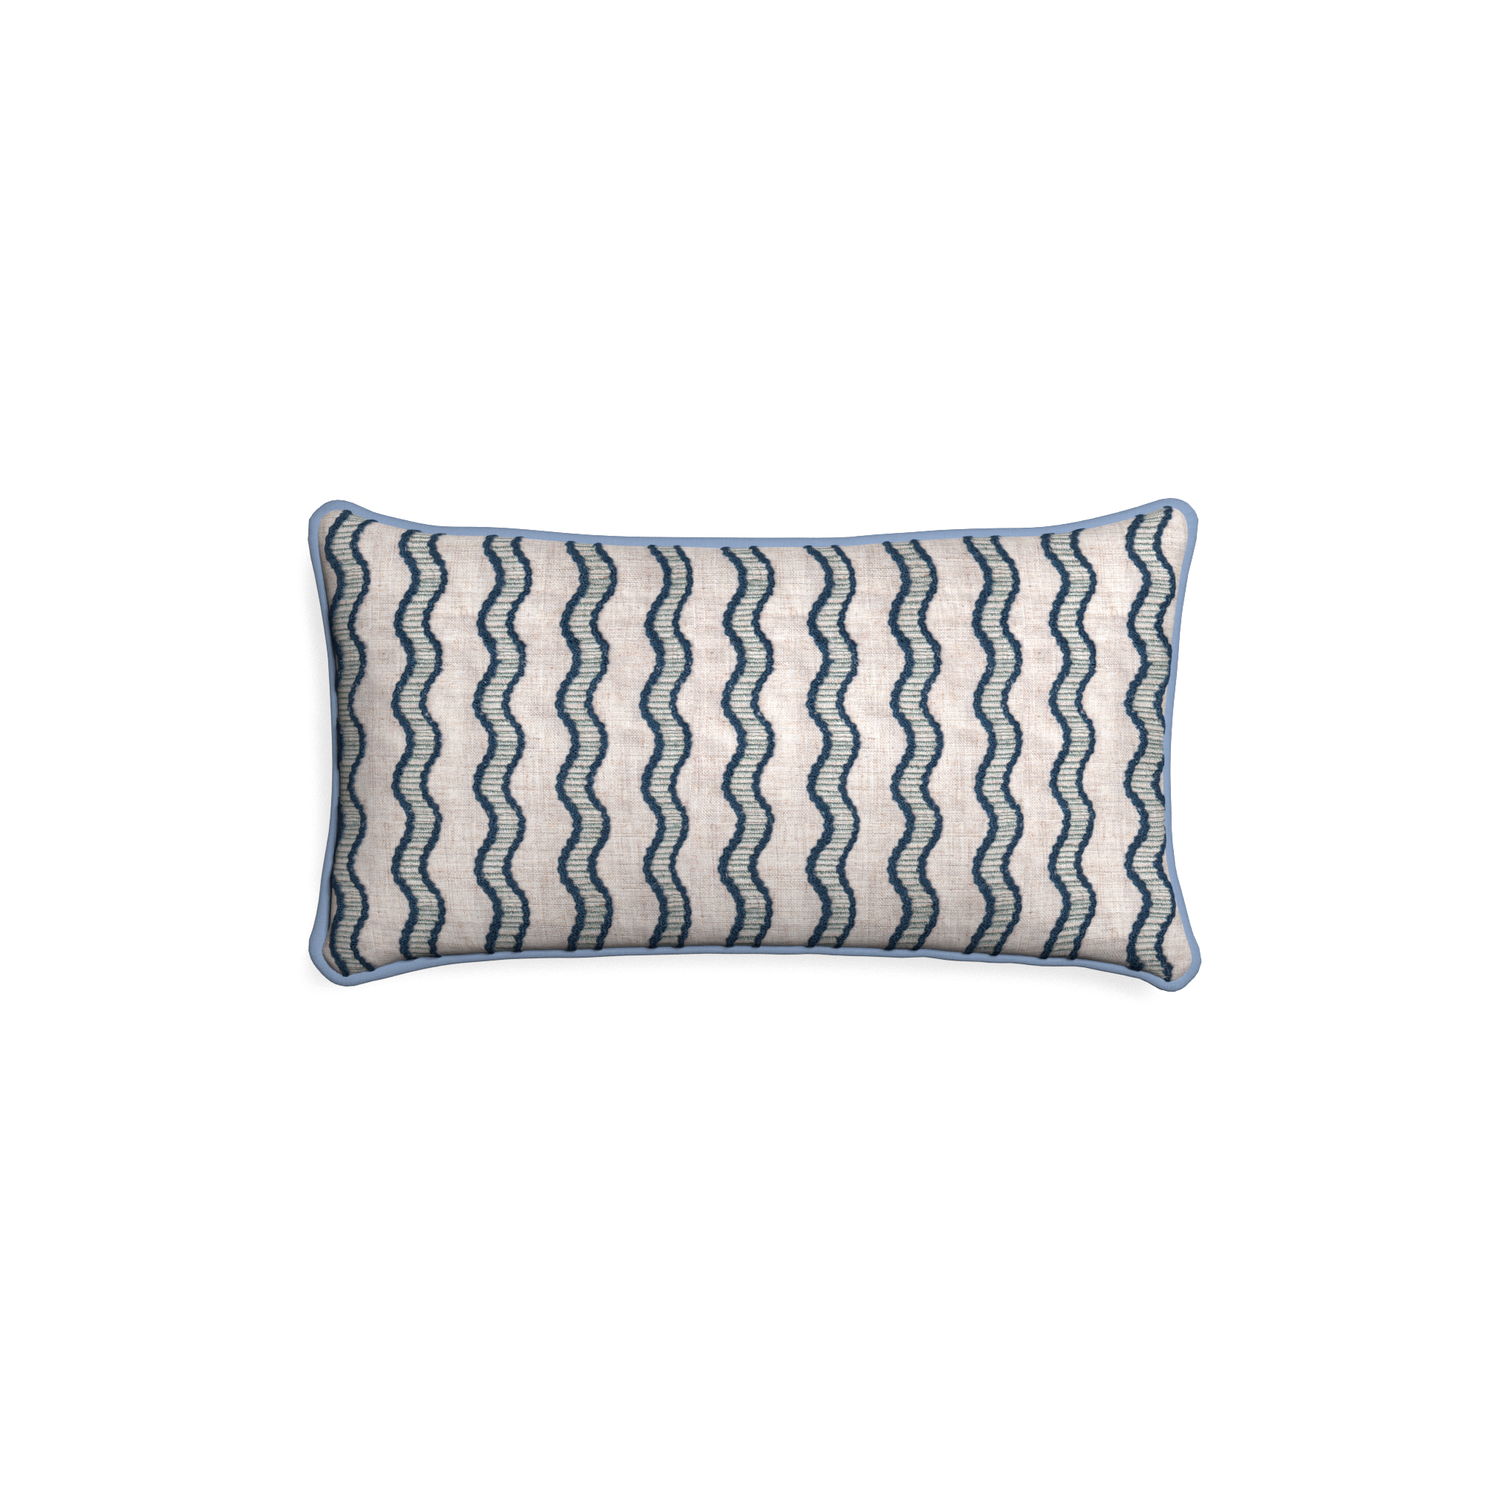 Petite-lumbar beatrice custom embroidered wavepillow with sky piping on white background